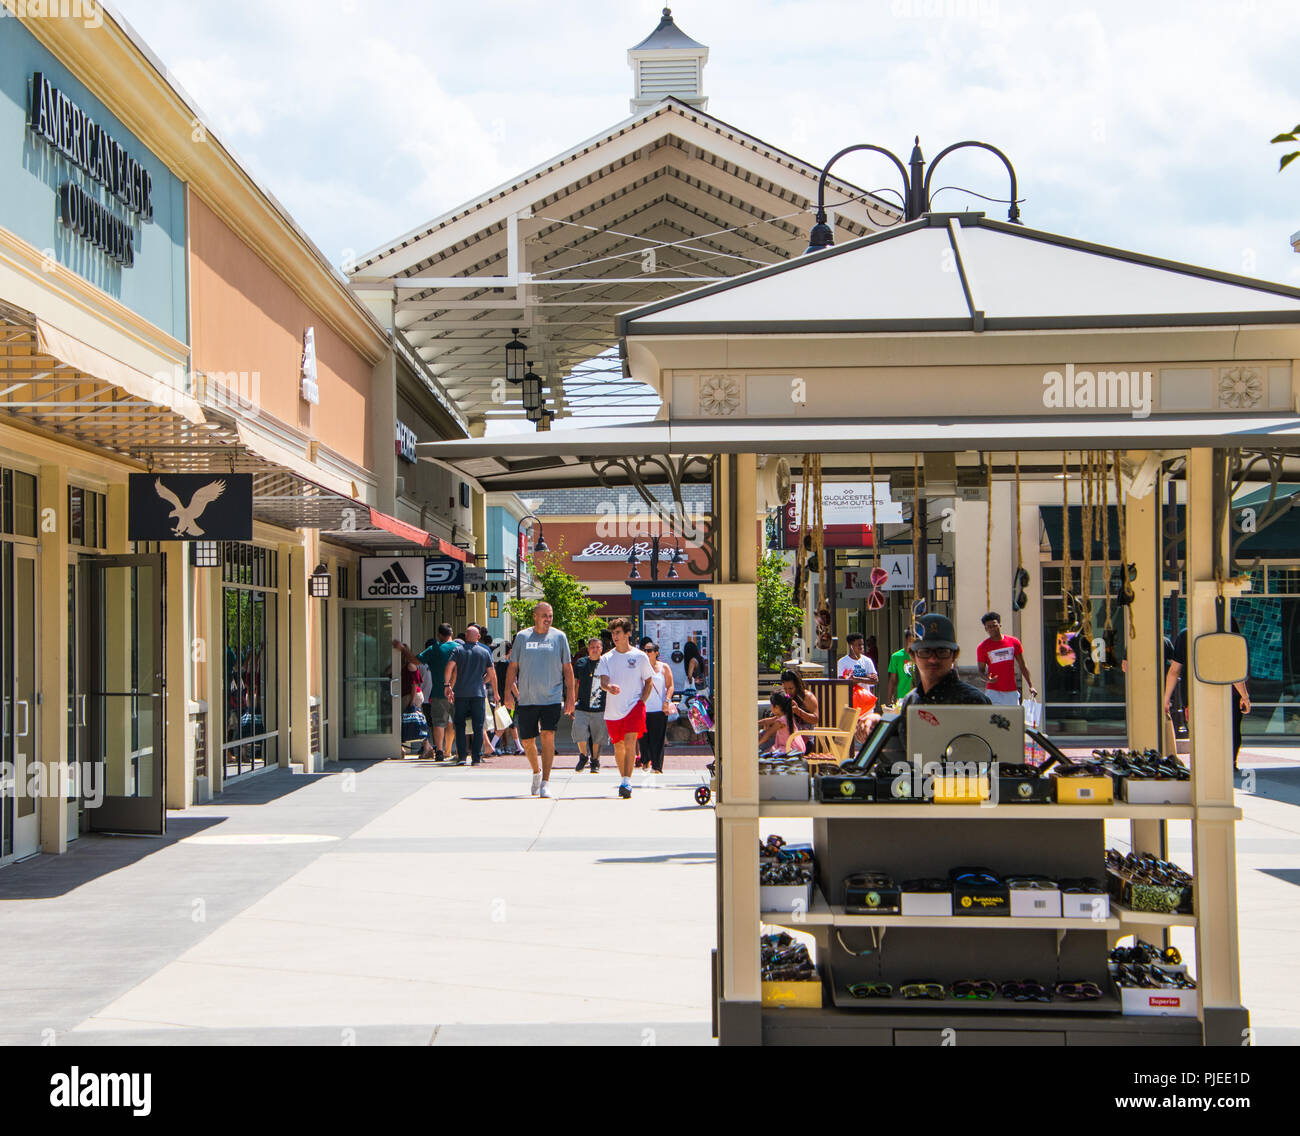 adidas gloucester outlets